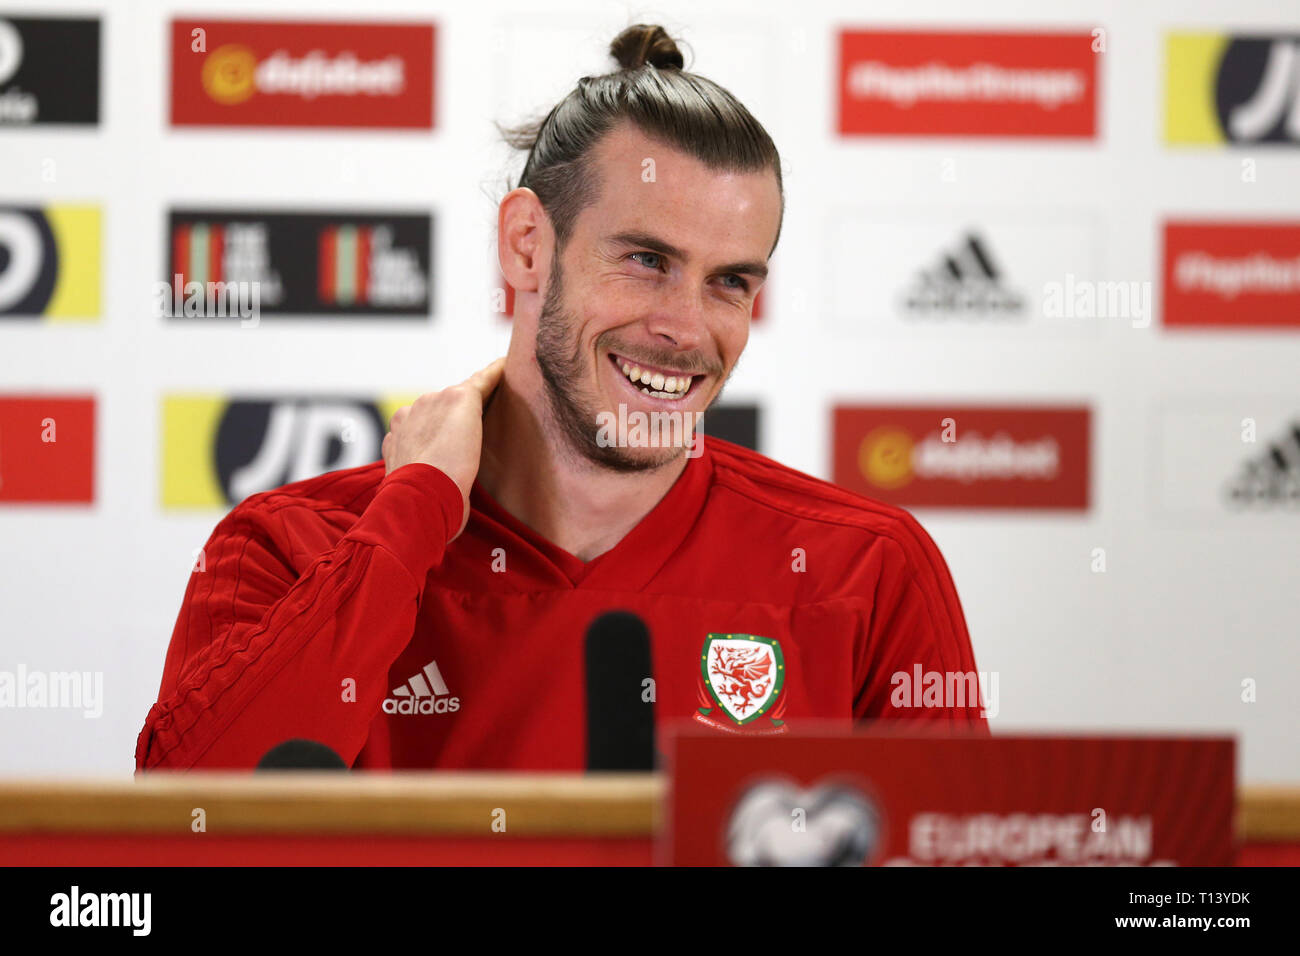 Cardiff, UK. 23rd Mar, 2019. Gareth Bale of Wales speaks to the press during the Wales football squad Press conference at the Cardiff City Stadium in Cardiff, South Wales on Saturday 23rd March 2019. the team are preparing for their UEFA Euro 2020 quailfier against Slovakia tomorrow. pic by Andrew Orchard/Alamy Live News Stock Photo